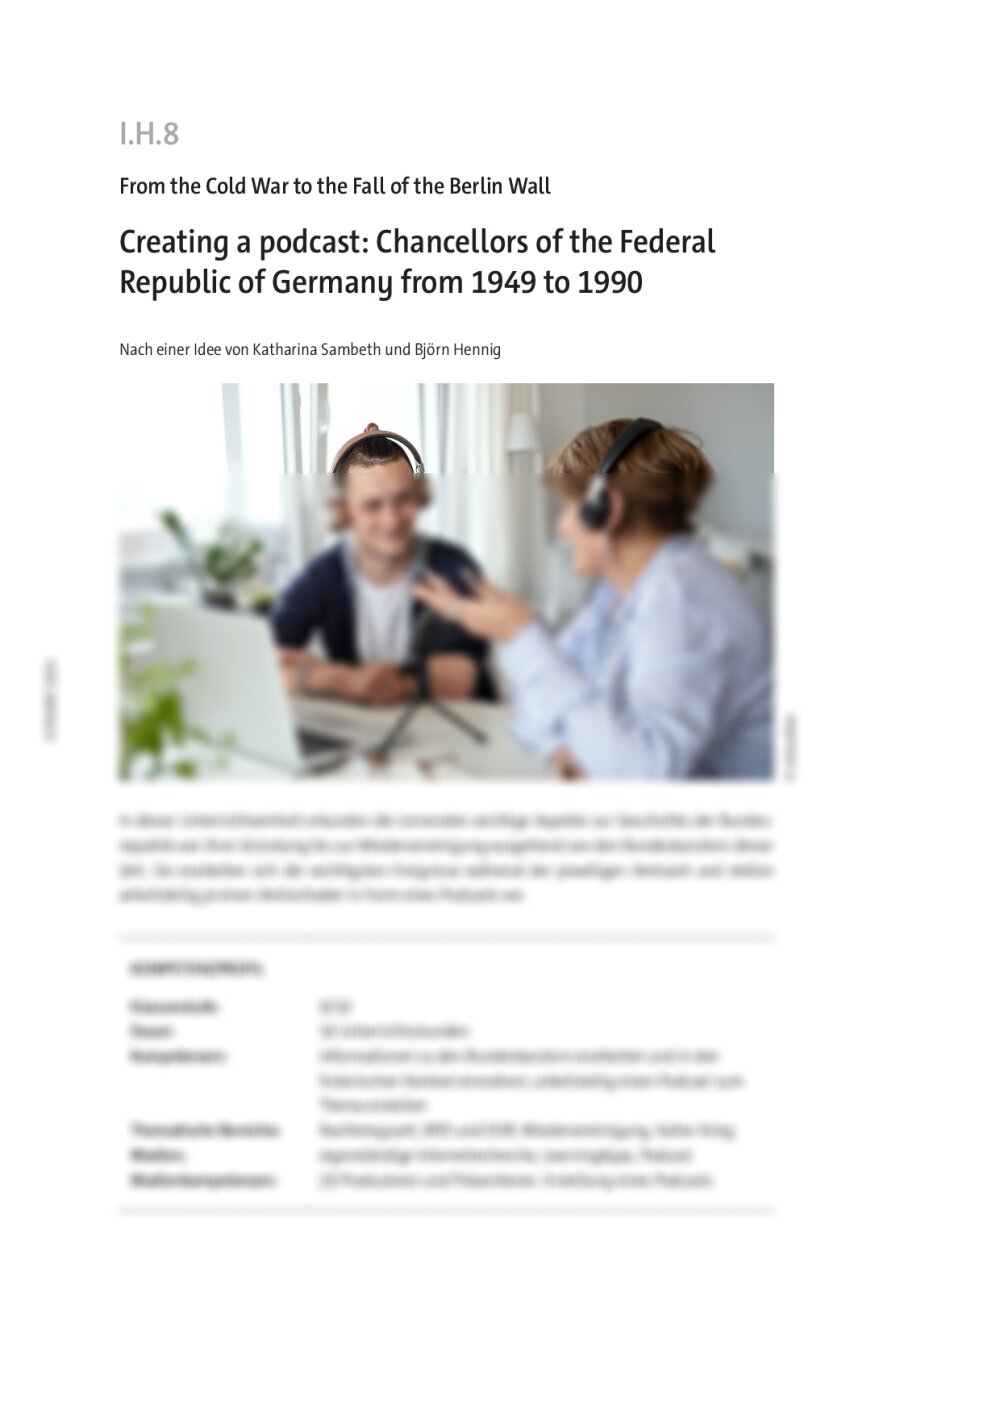 Creating a podcast: Chancellors of the Federal Republic of Germany from 1949 to 1990 - Seite 1